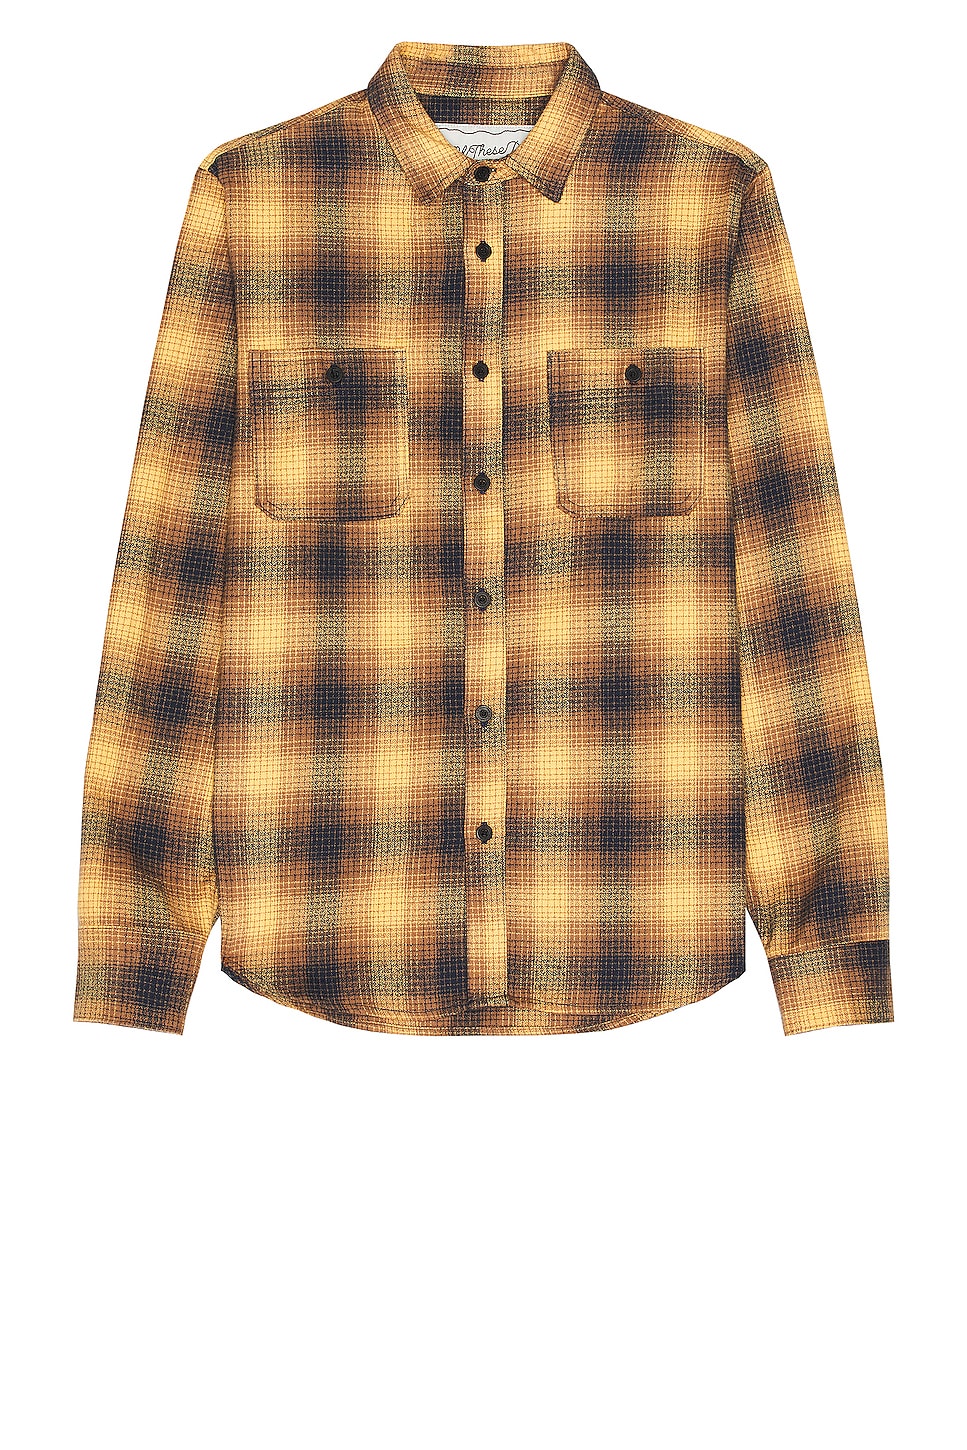 Image 1 of ONE OF THESE DAYS San Marcos Flannel Shirt in Saffron